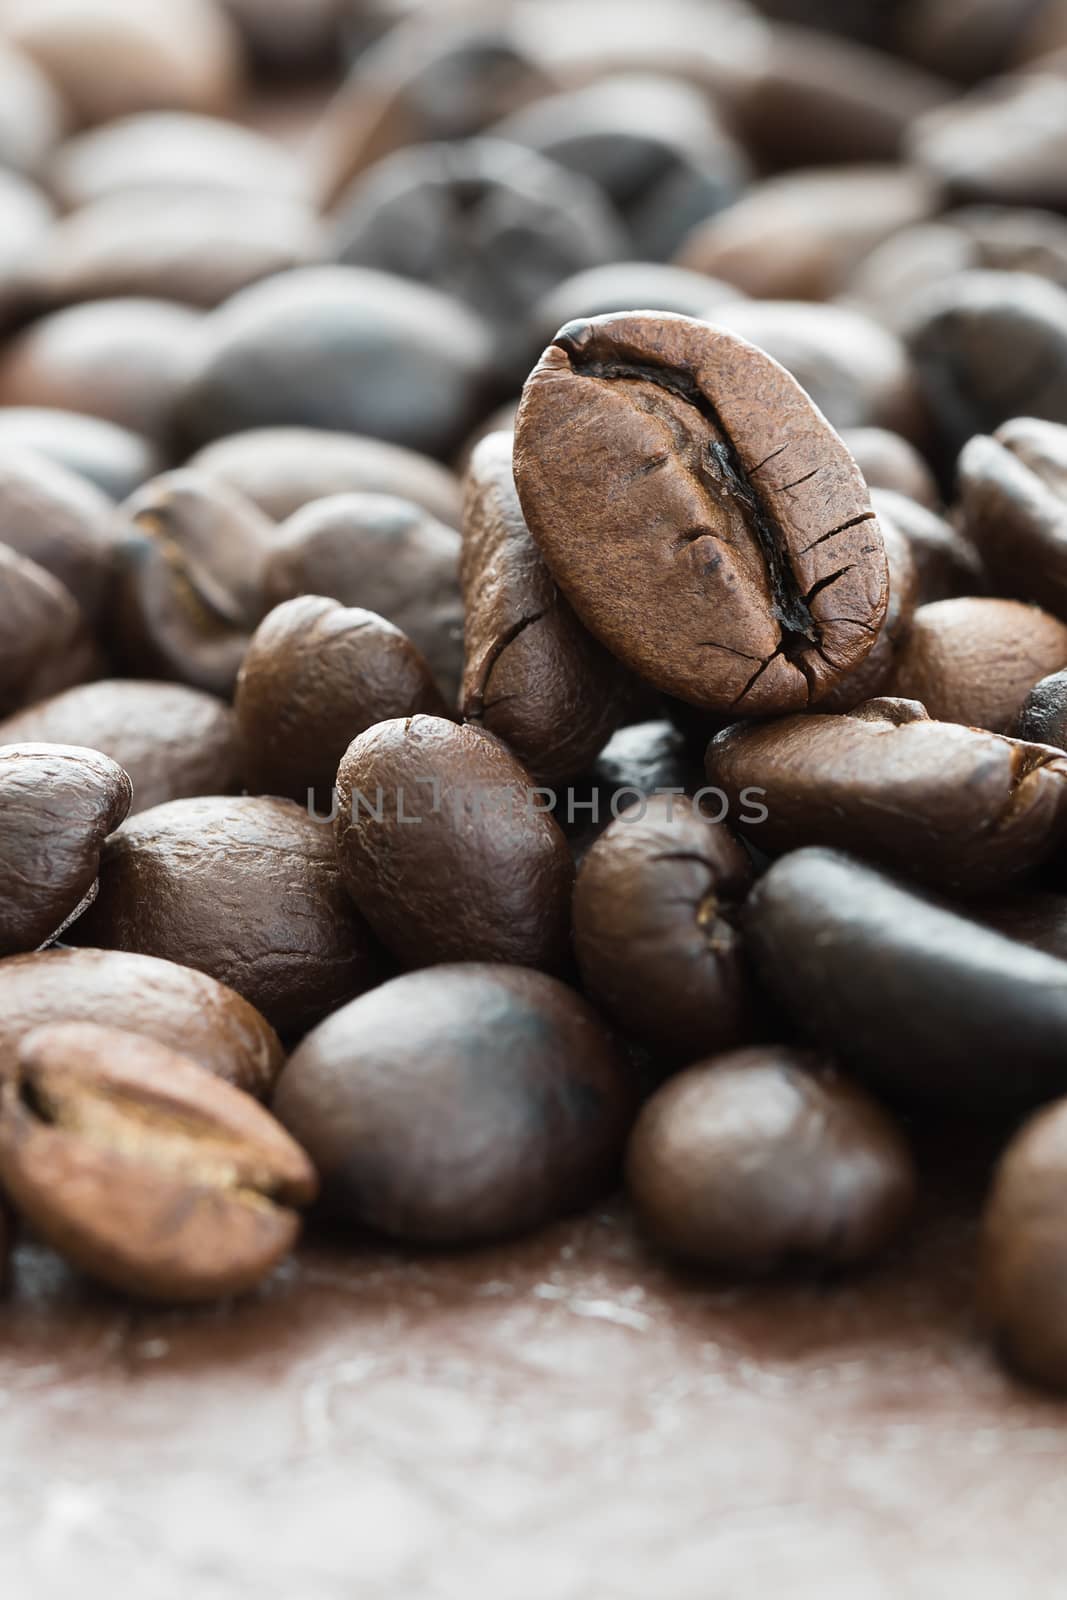 Heap of roasted brown coffee beans  by stoonn